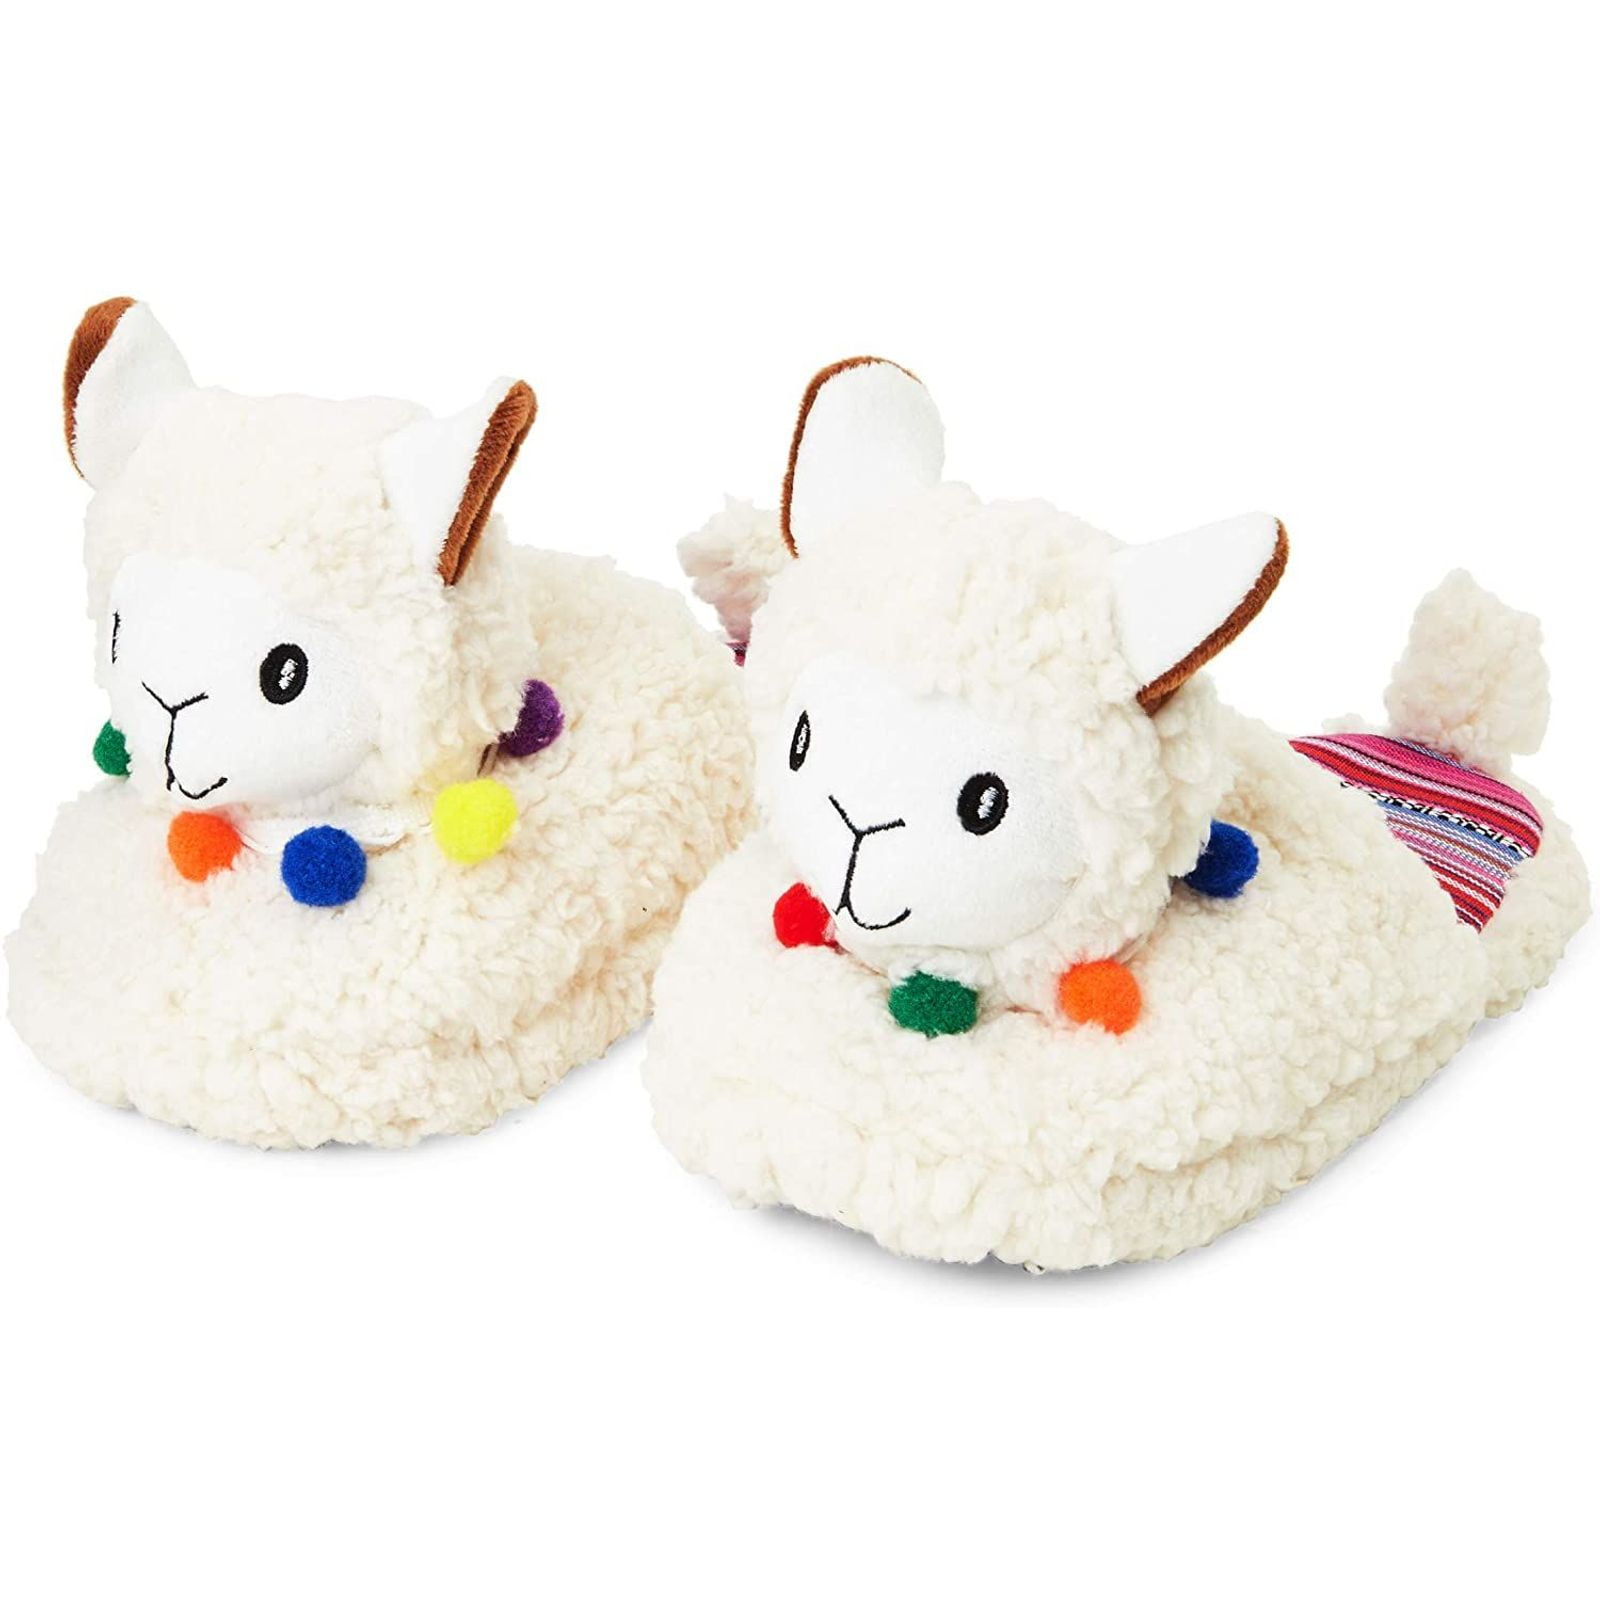 Jane-LEE Rainbow Llama House Slippers/Bedroom Shoes/Flat Shoes/Indoor Slippers